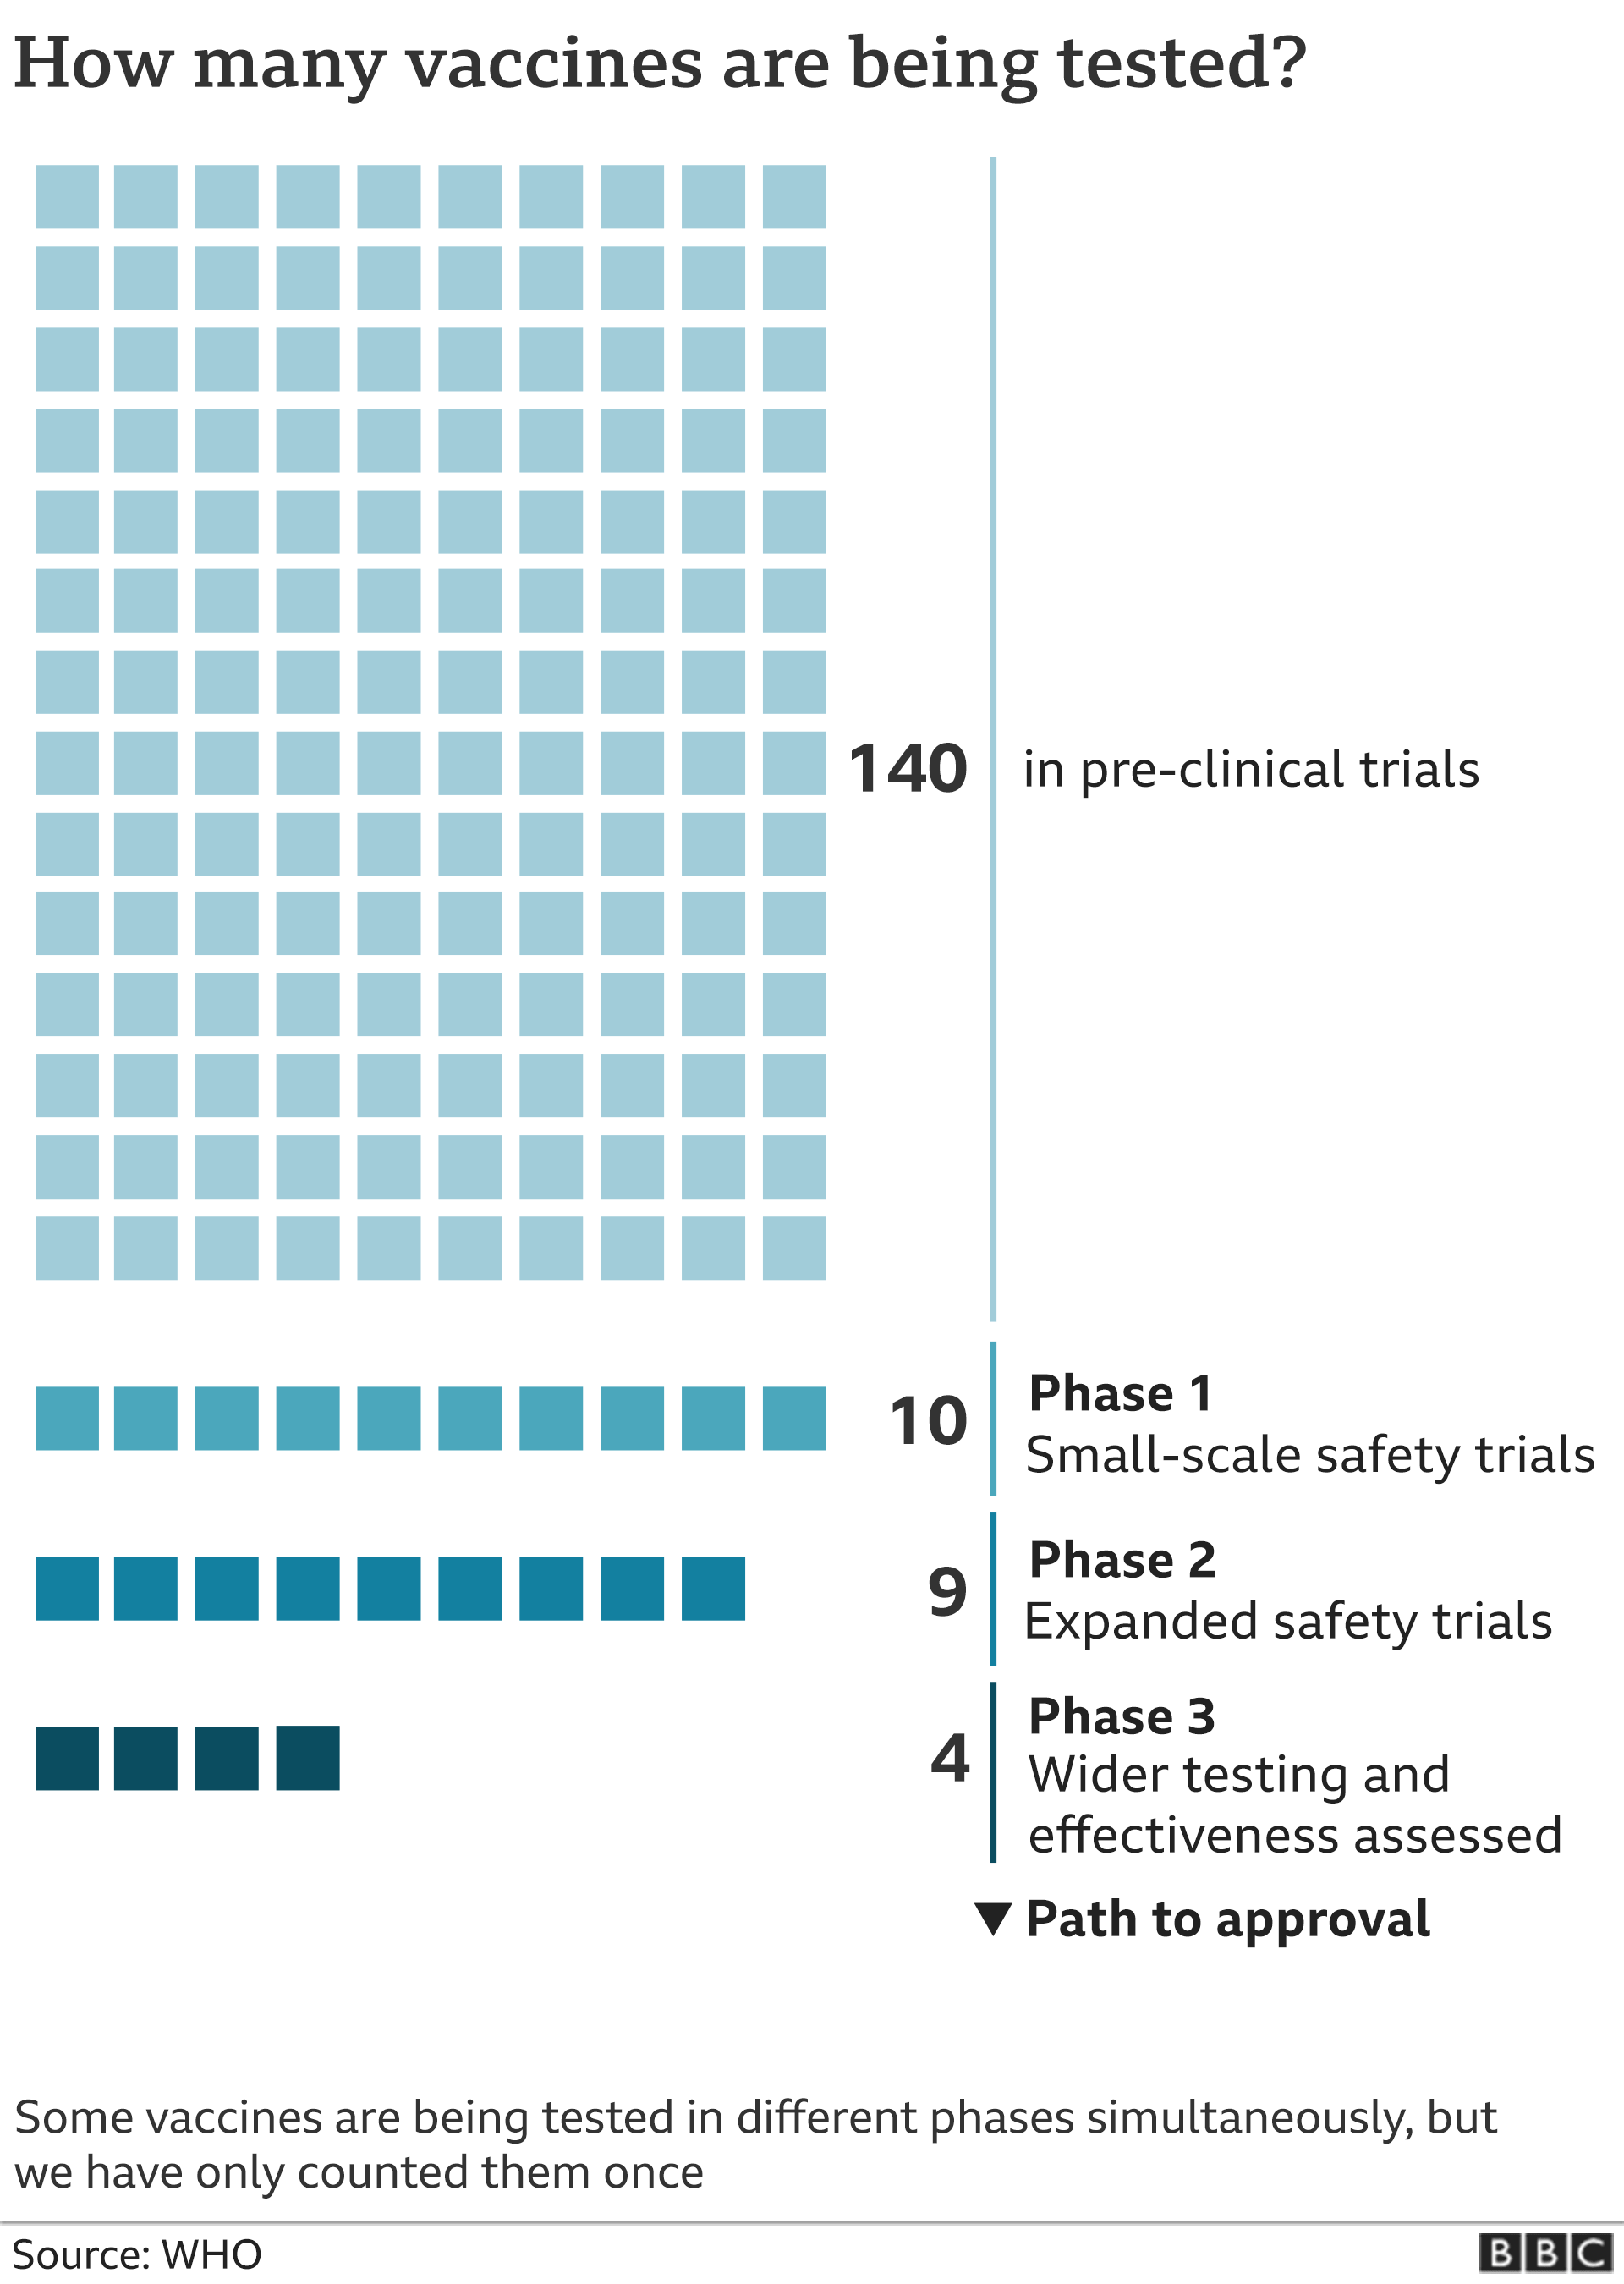 Chart showing 4 vaccines now in phase 3 of testing